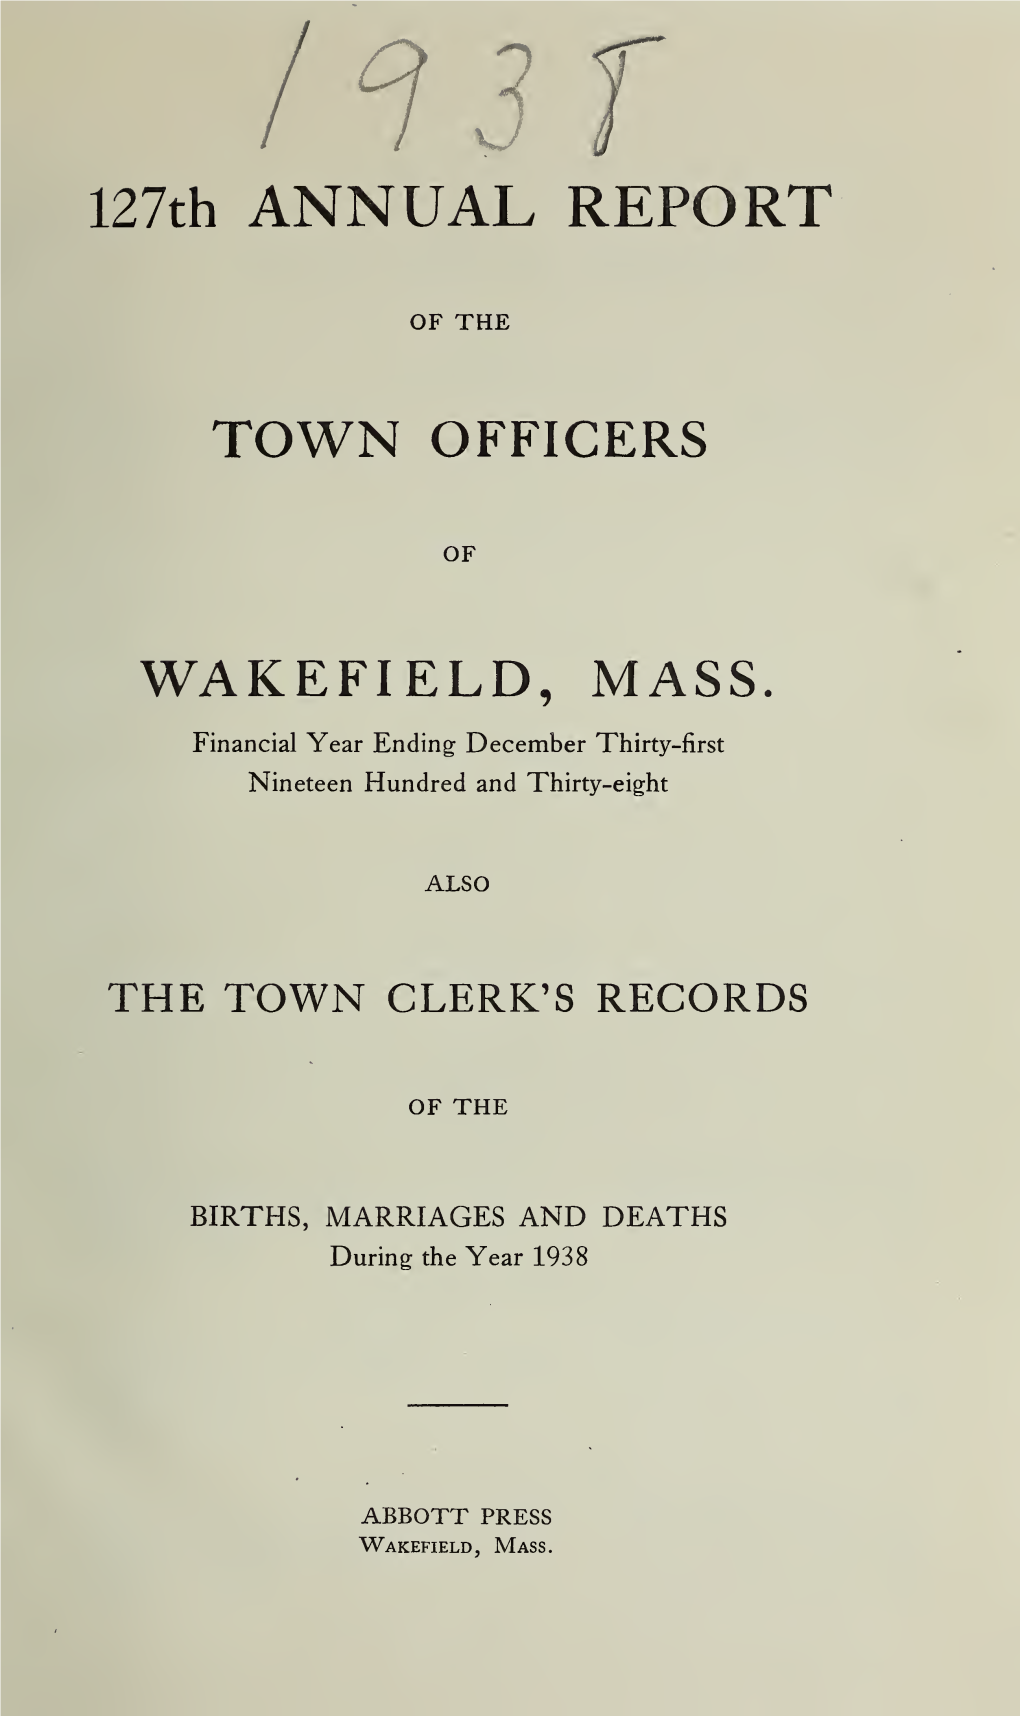 Annual Report of the Town Officers of Wakefield Massachusetts